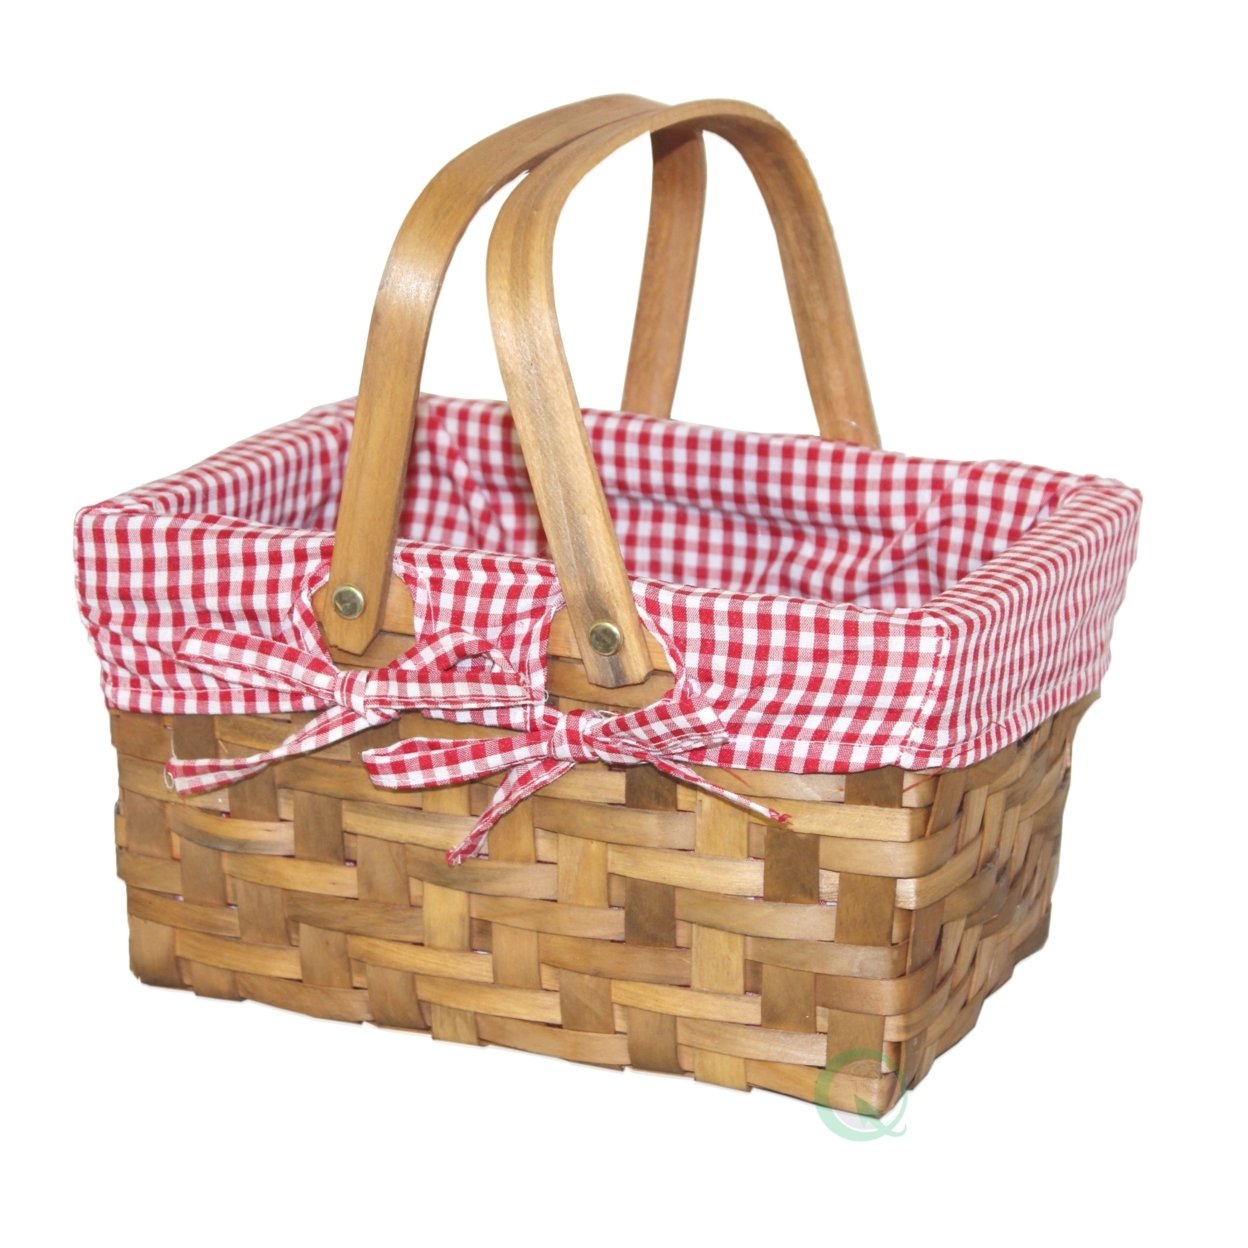 Small Rectangular Basket Lined With Gingham Lining, Carrying Handles